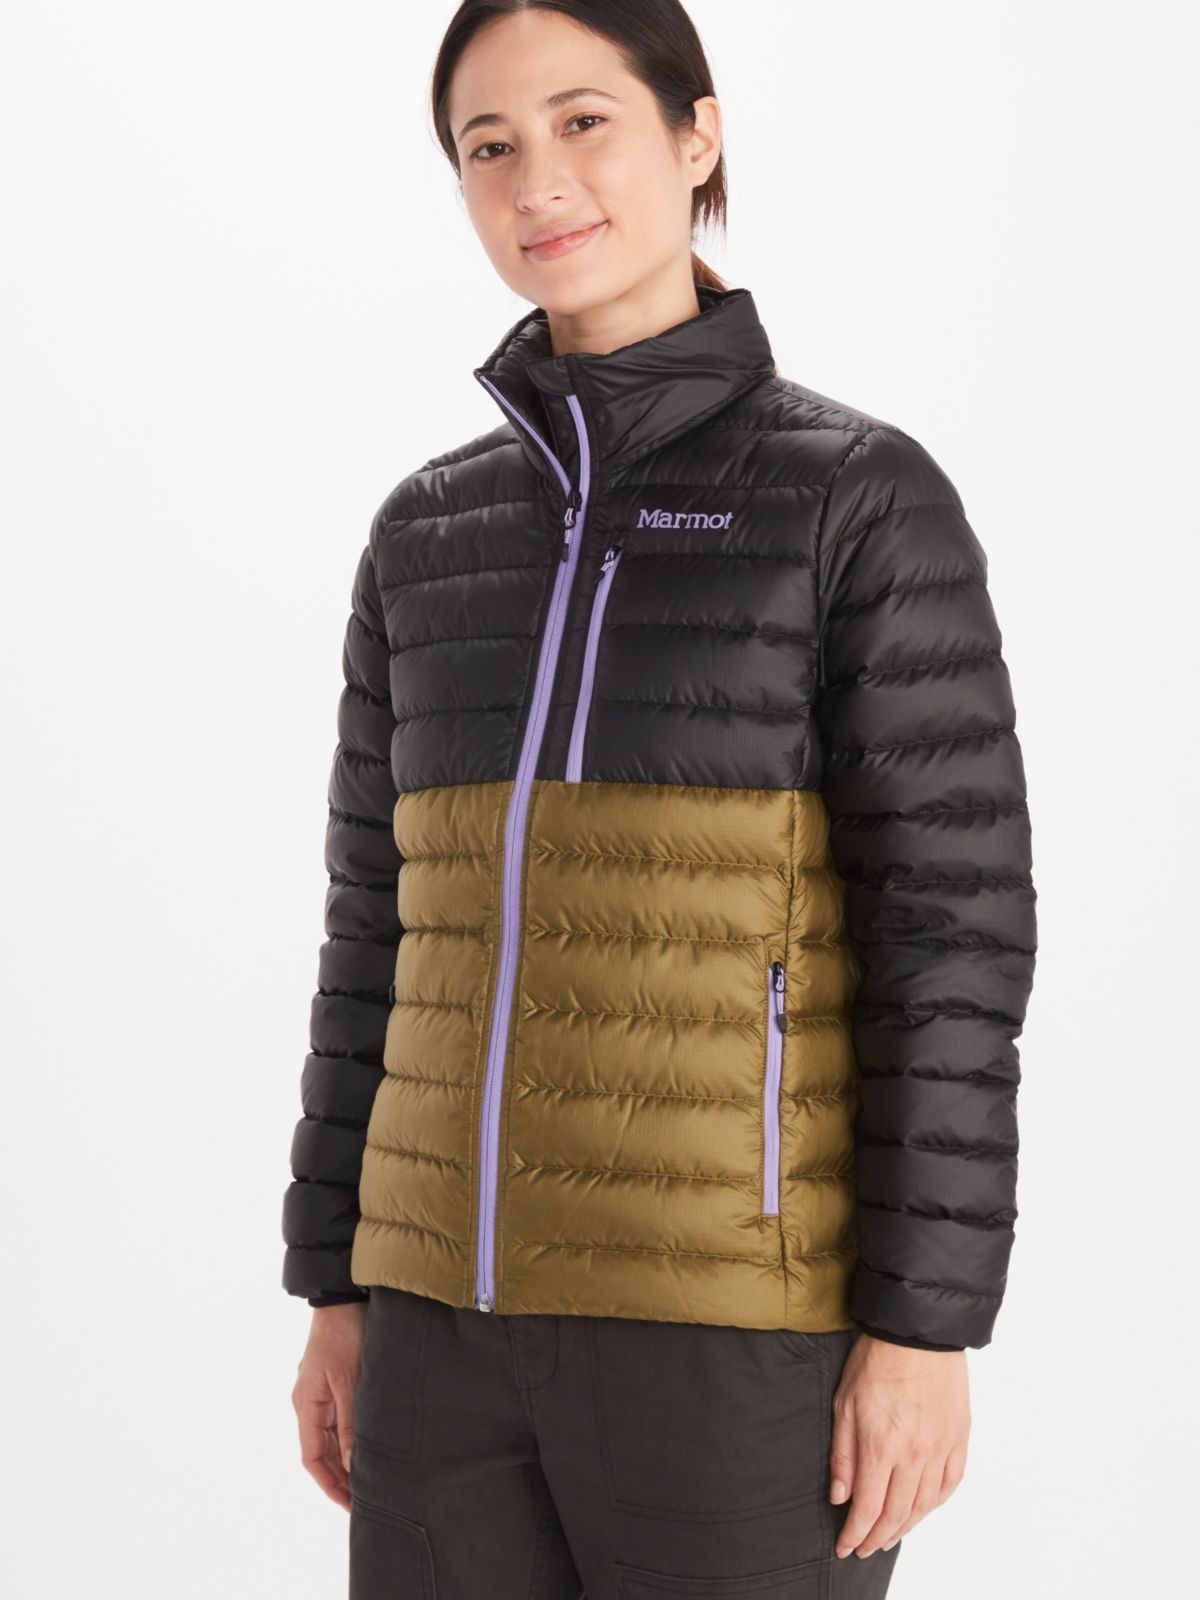 Model wearing Marmot women's insulated jacket in black and gold with full zip accented in lilac